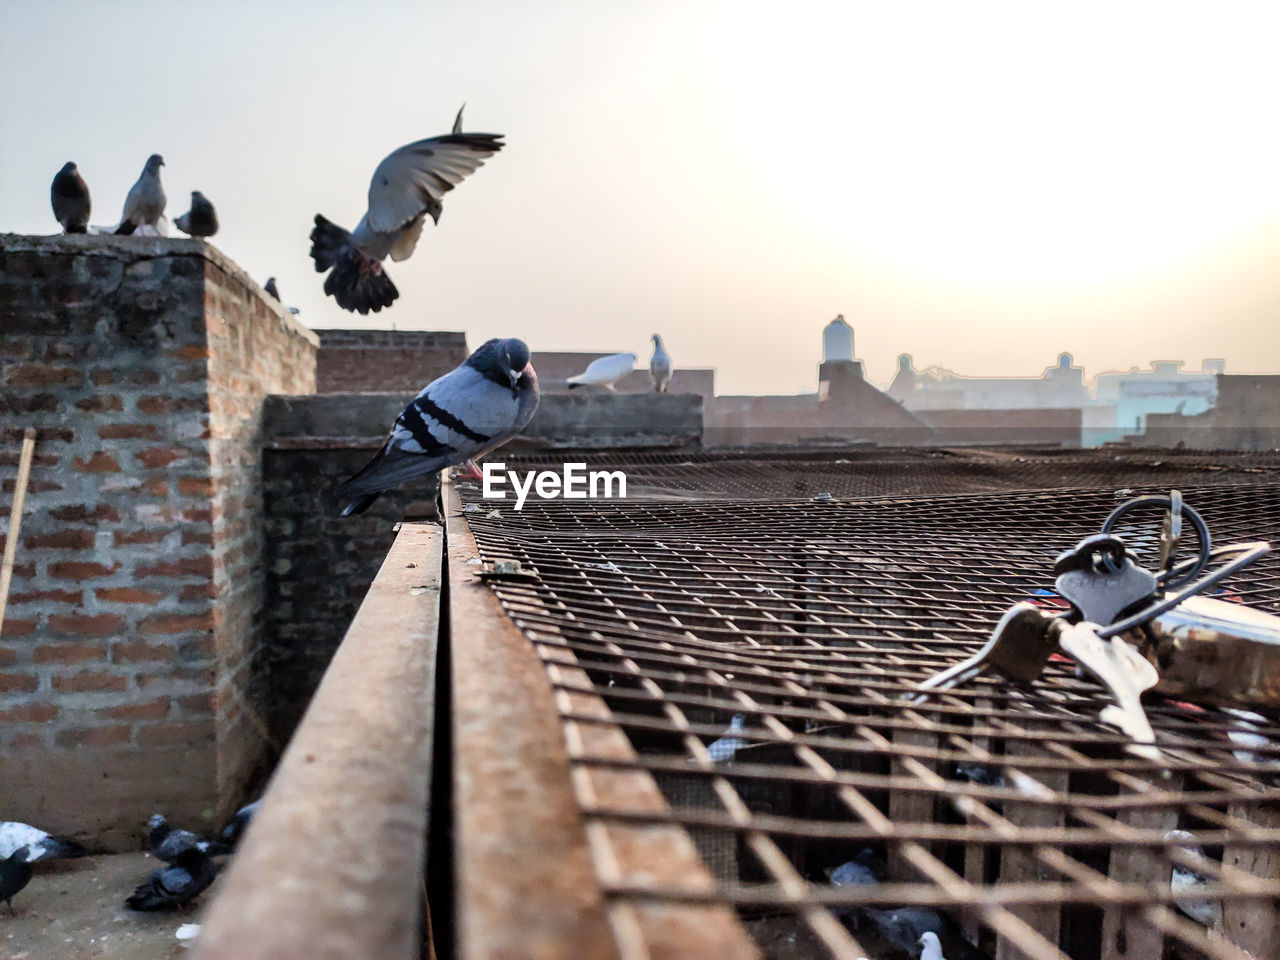 Pigeon flying on rooftops